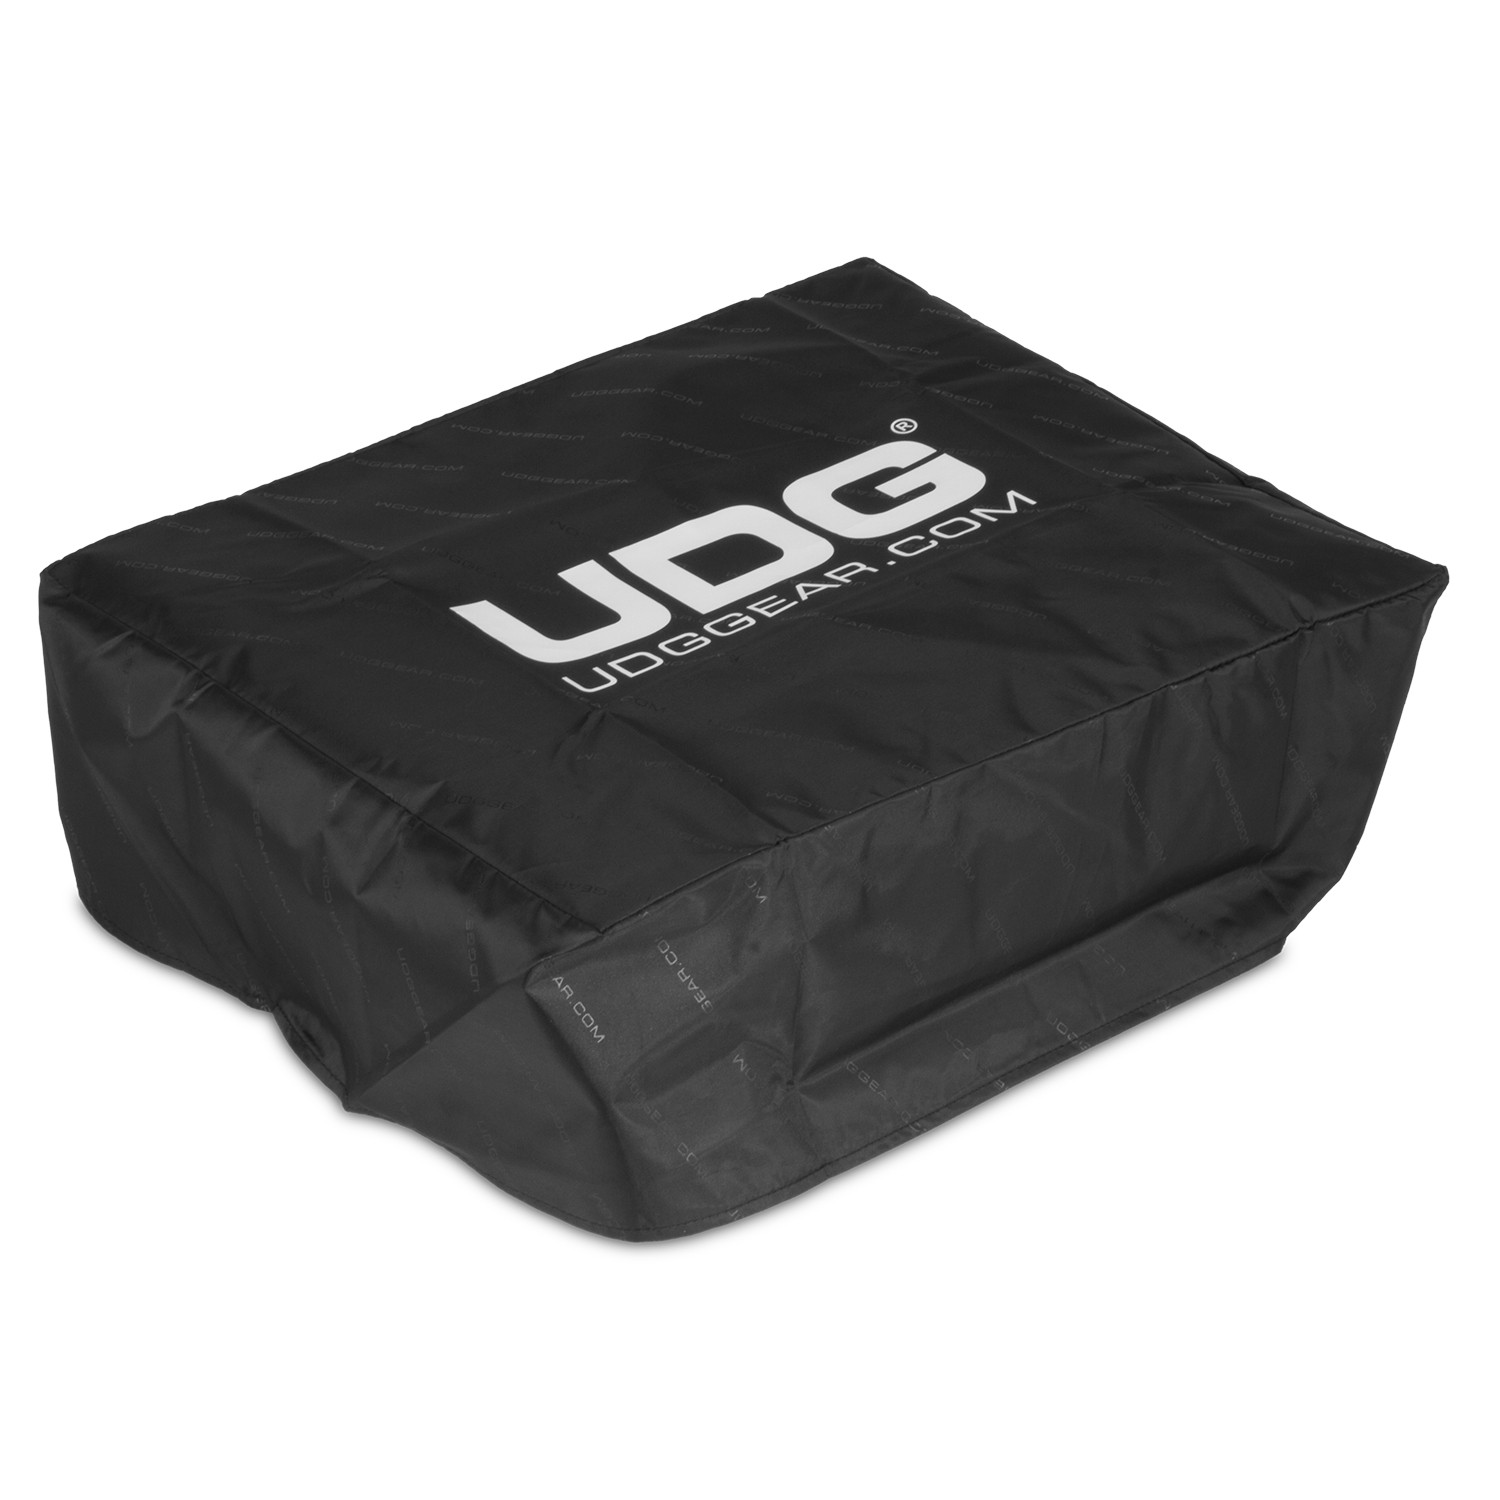 UDG Ultimate Turntable & 19" Mixer Dust Cover Black (1 pc) по цене 1 365 ₽